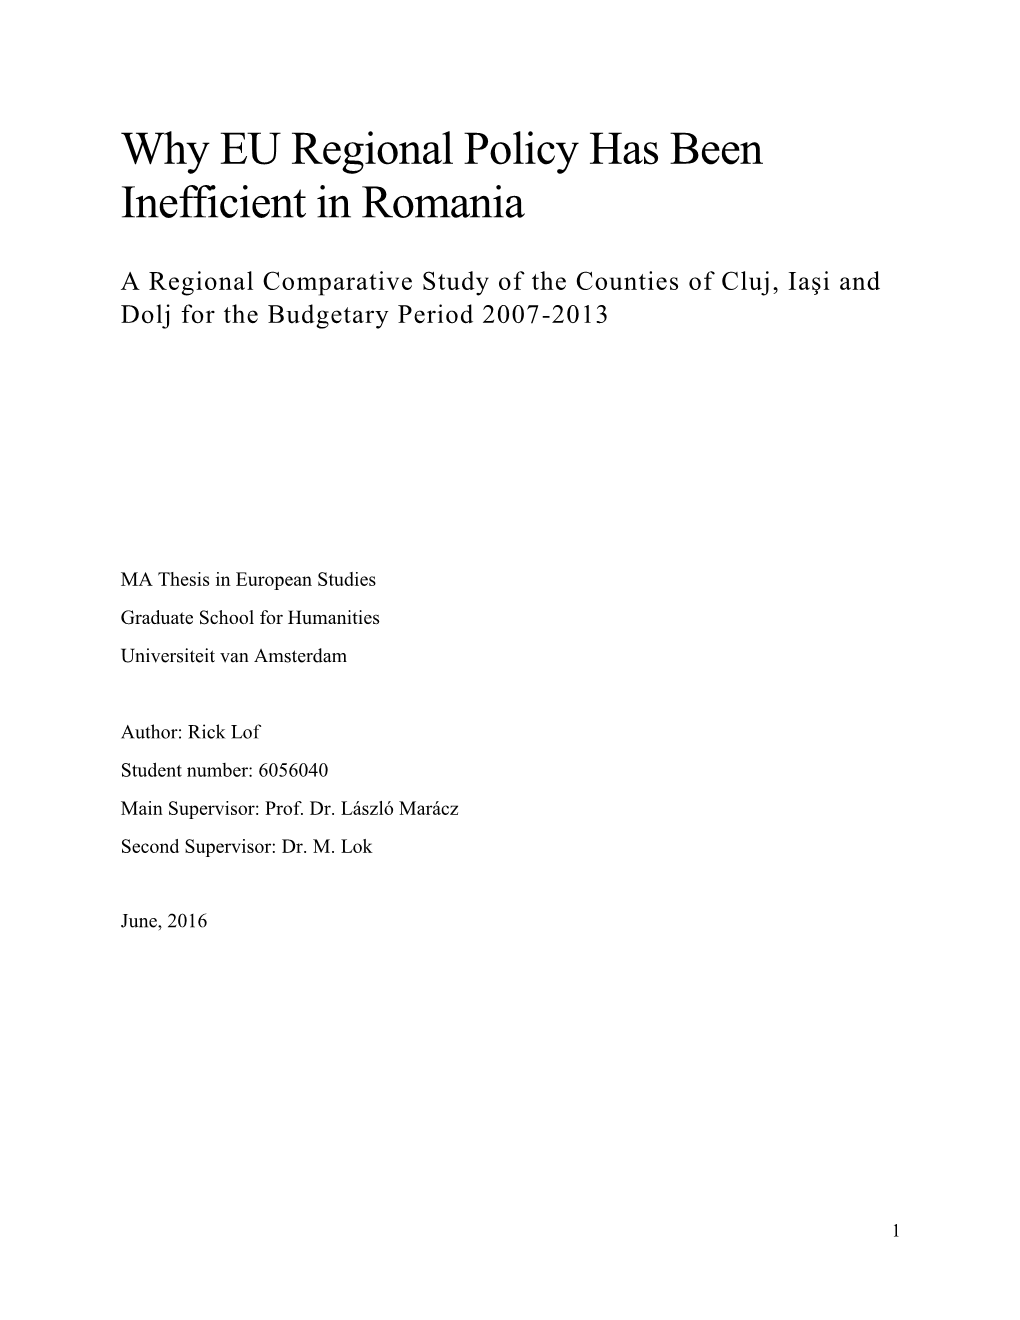 Why EU Regional Policy Has Been Inefficient in Romania